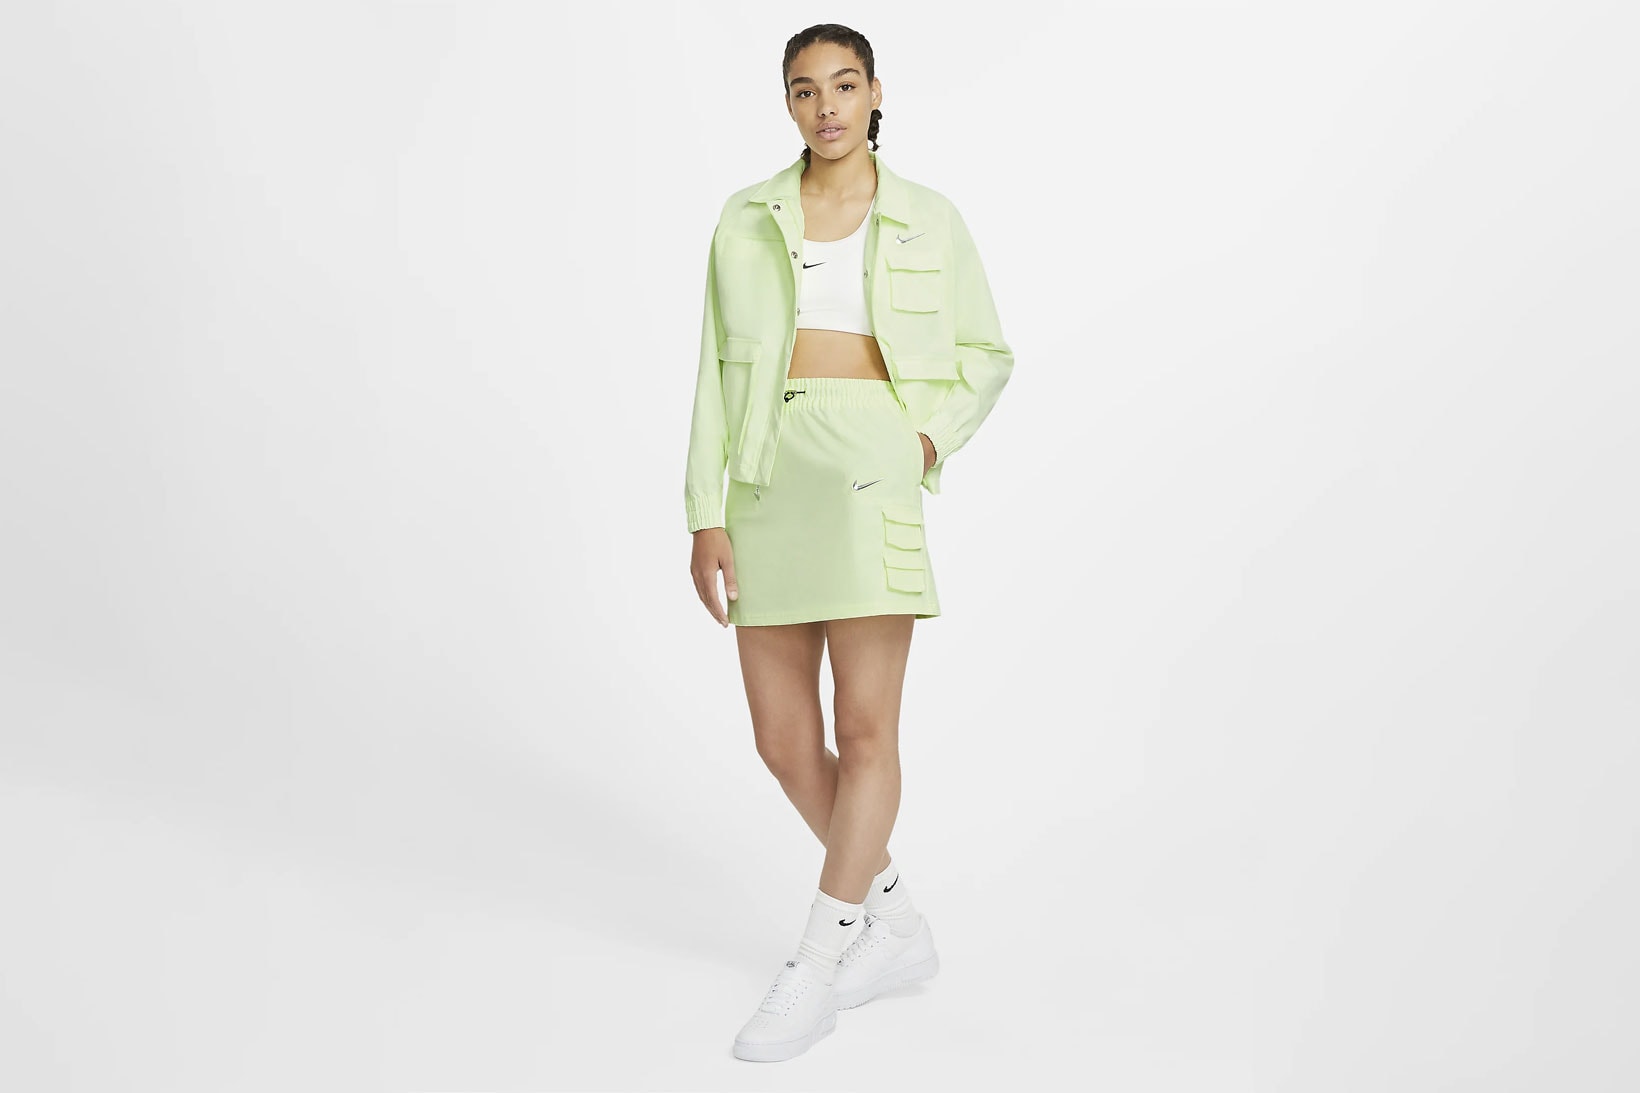 nike sportswear swoosh logo skirt barely volt spring summer outfit green jacket white cropped top sneakers